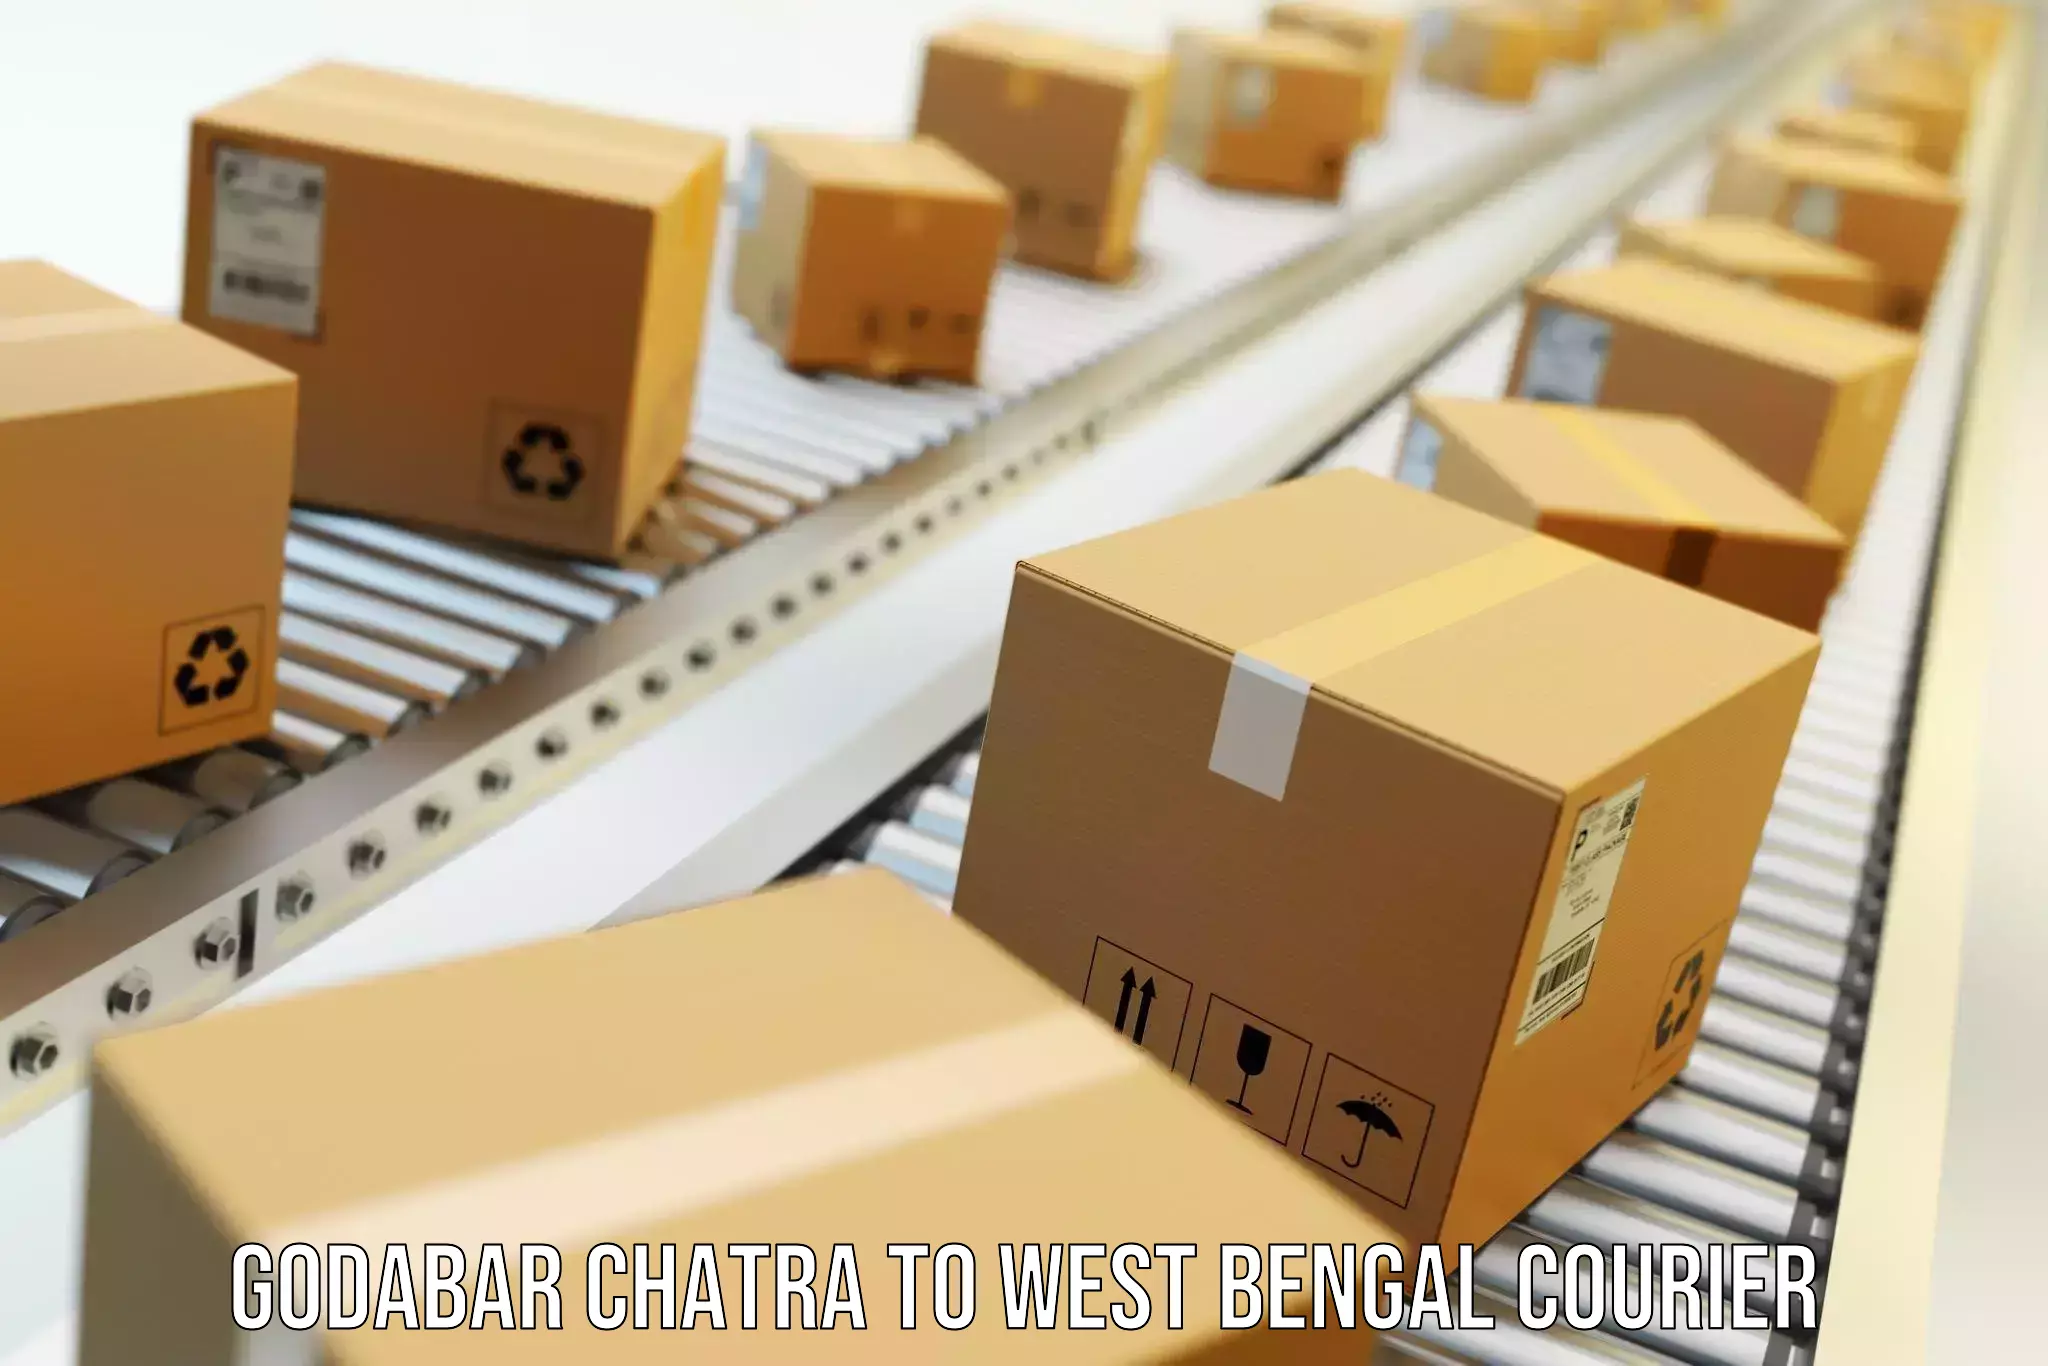 Furniture delivery service Godabar Chatra to Hooghly